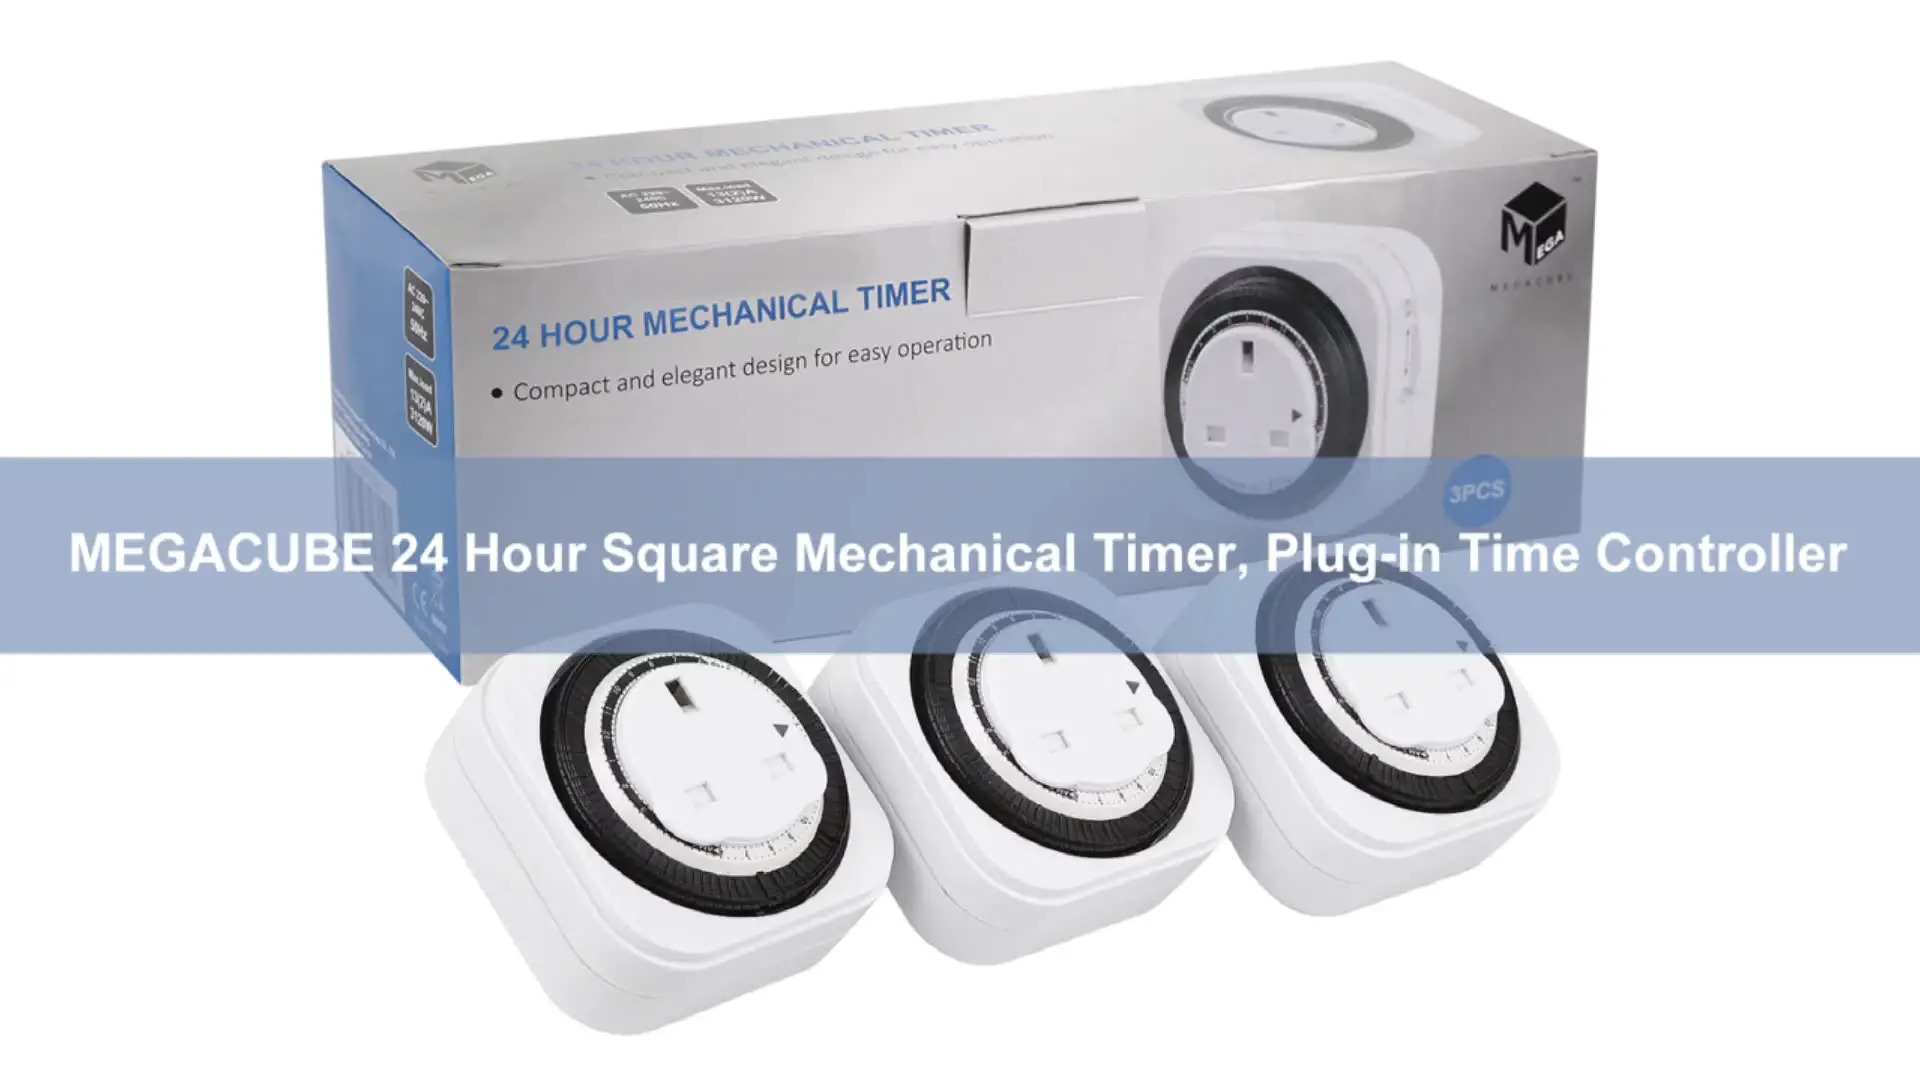 24 Hour Plug-In Time Controller